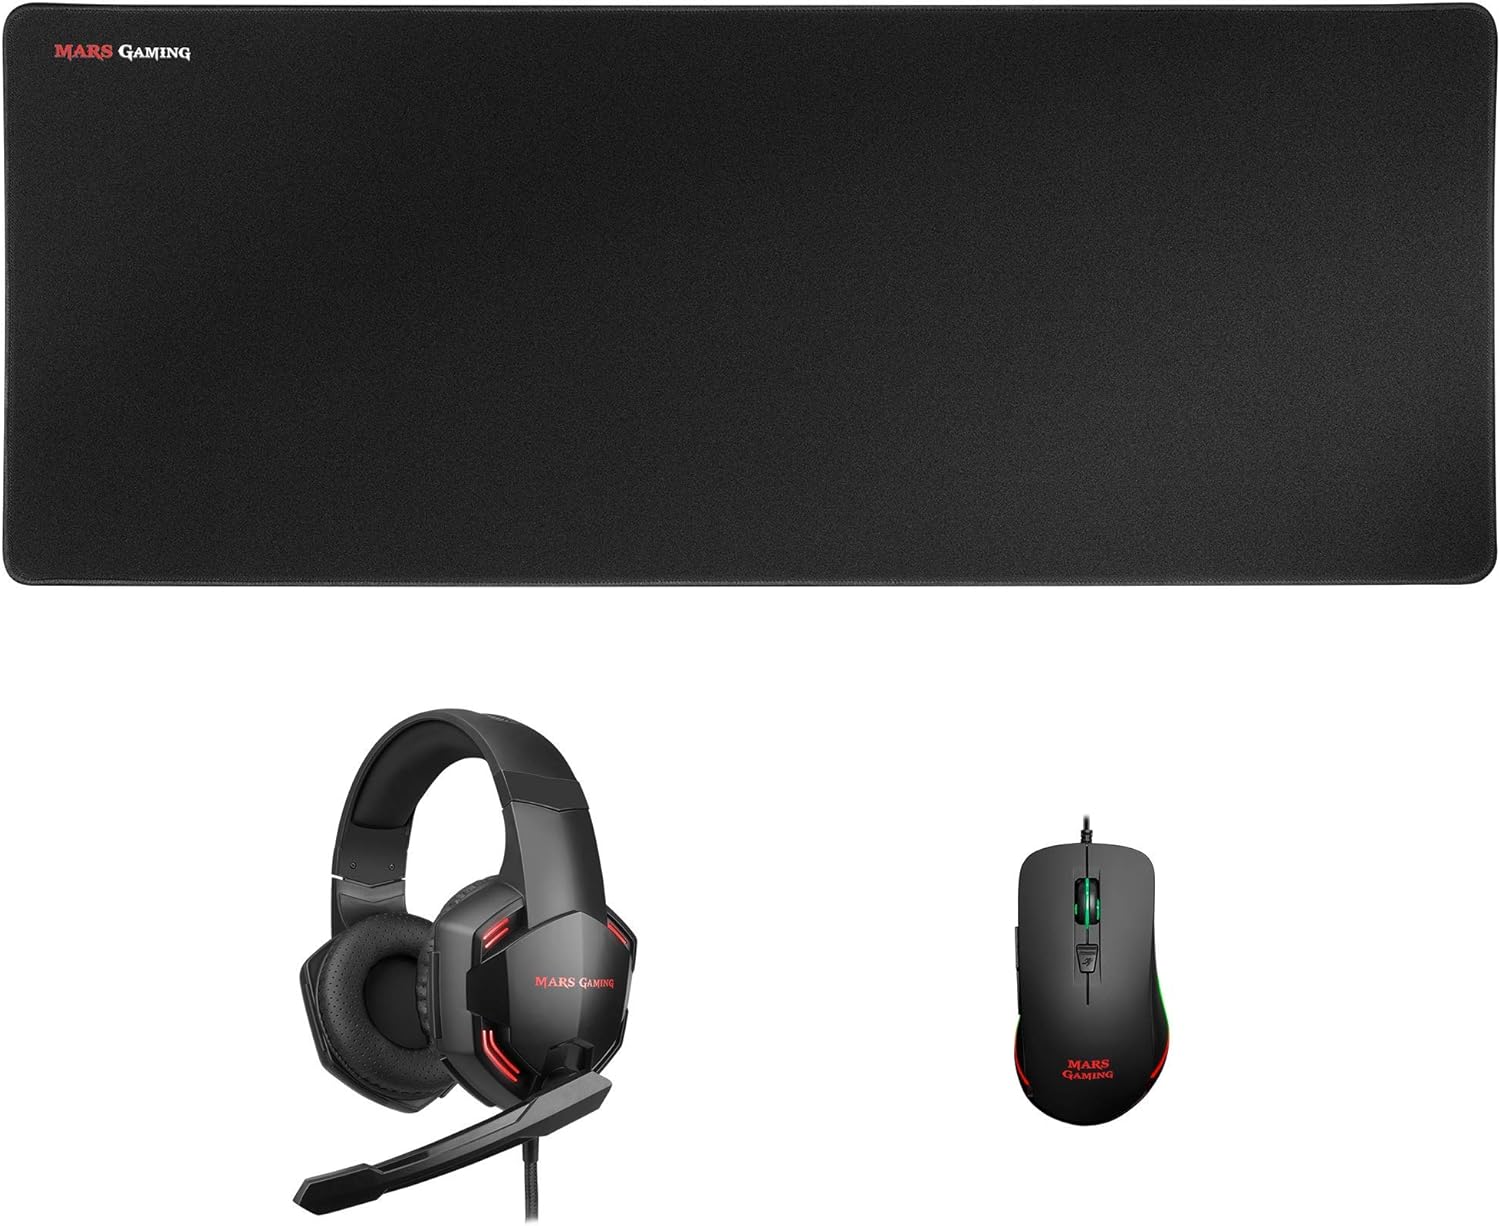 KIT 3in1 MARSGAMING MOUSEPAD CUFFIA MOUSE